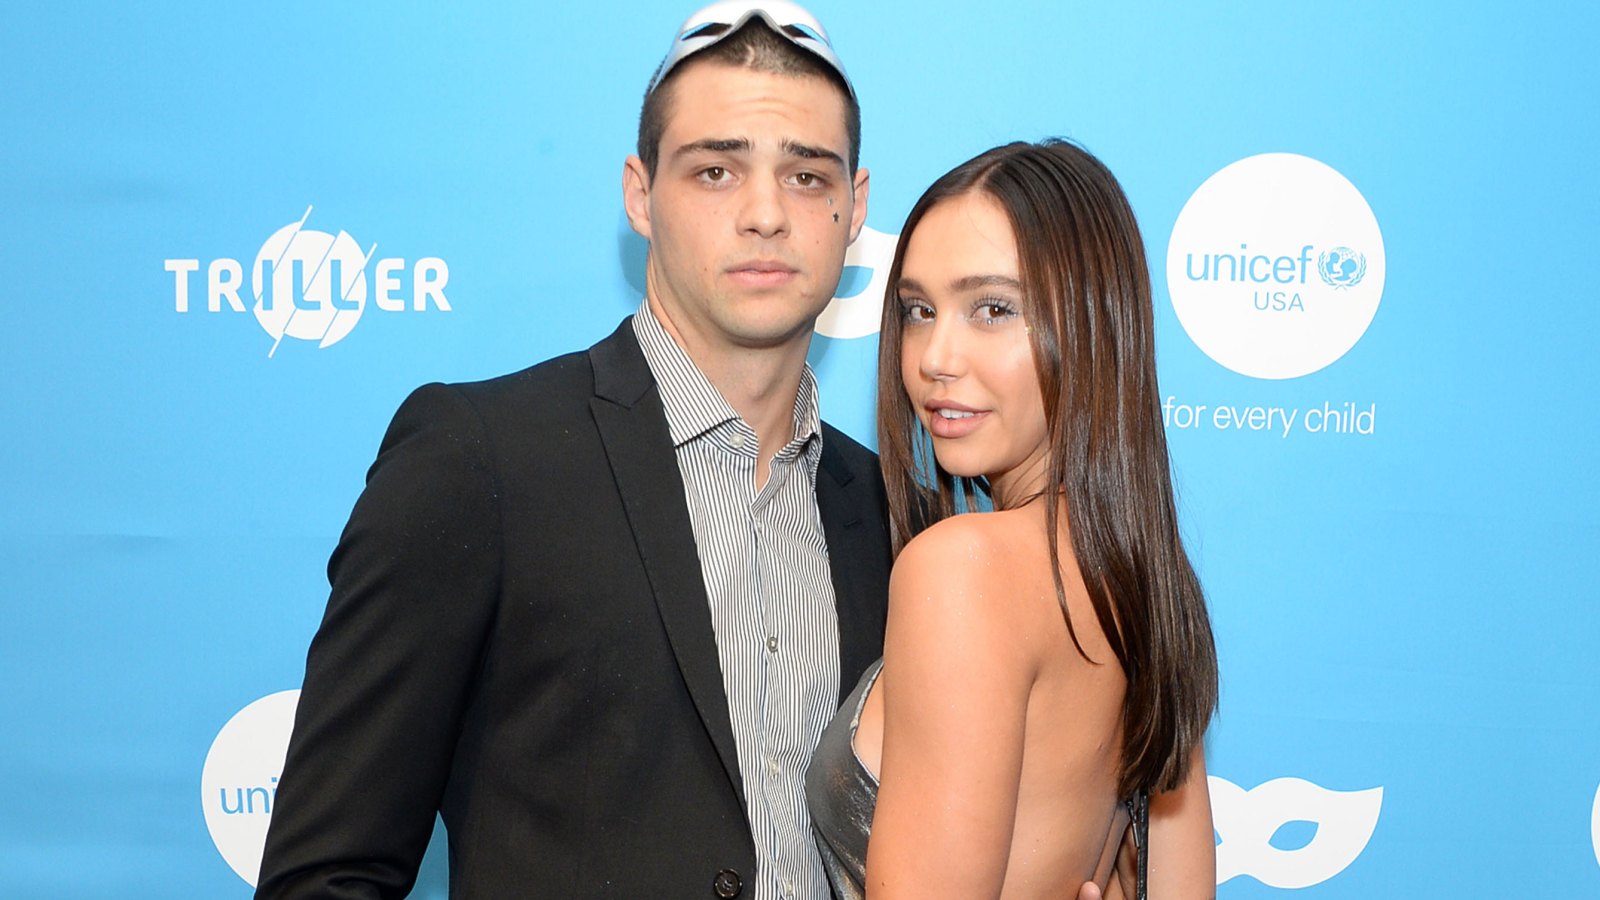 Noah Centineo and Alexis Ren Make Red Carpet Debut at UNICEF